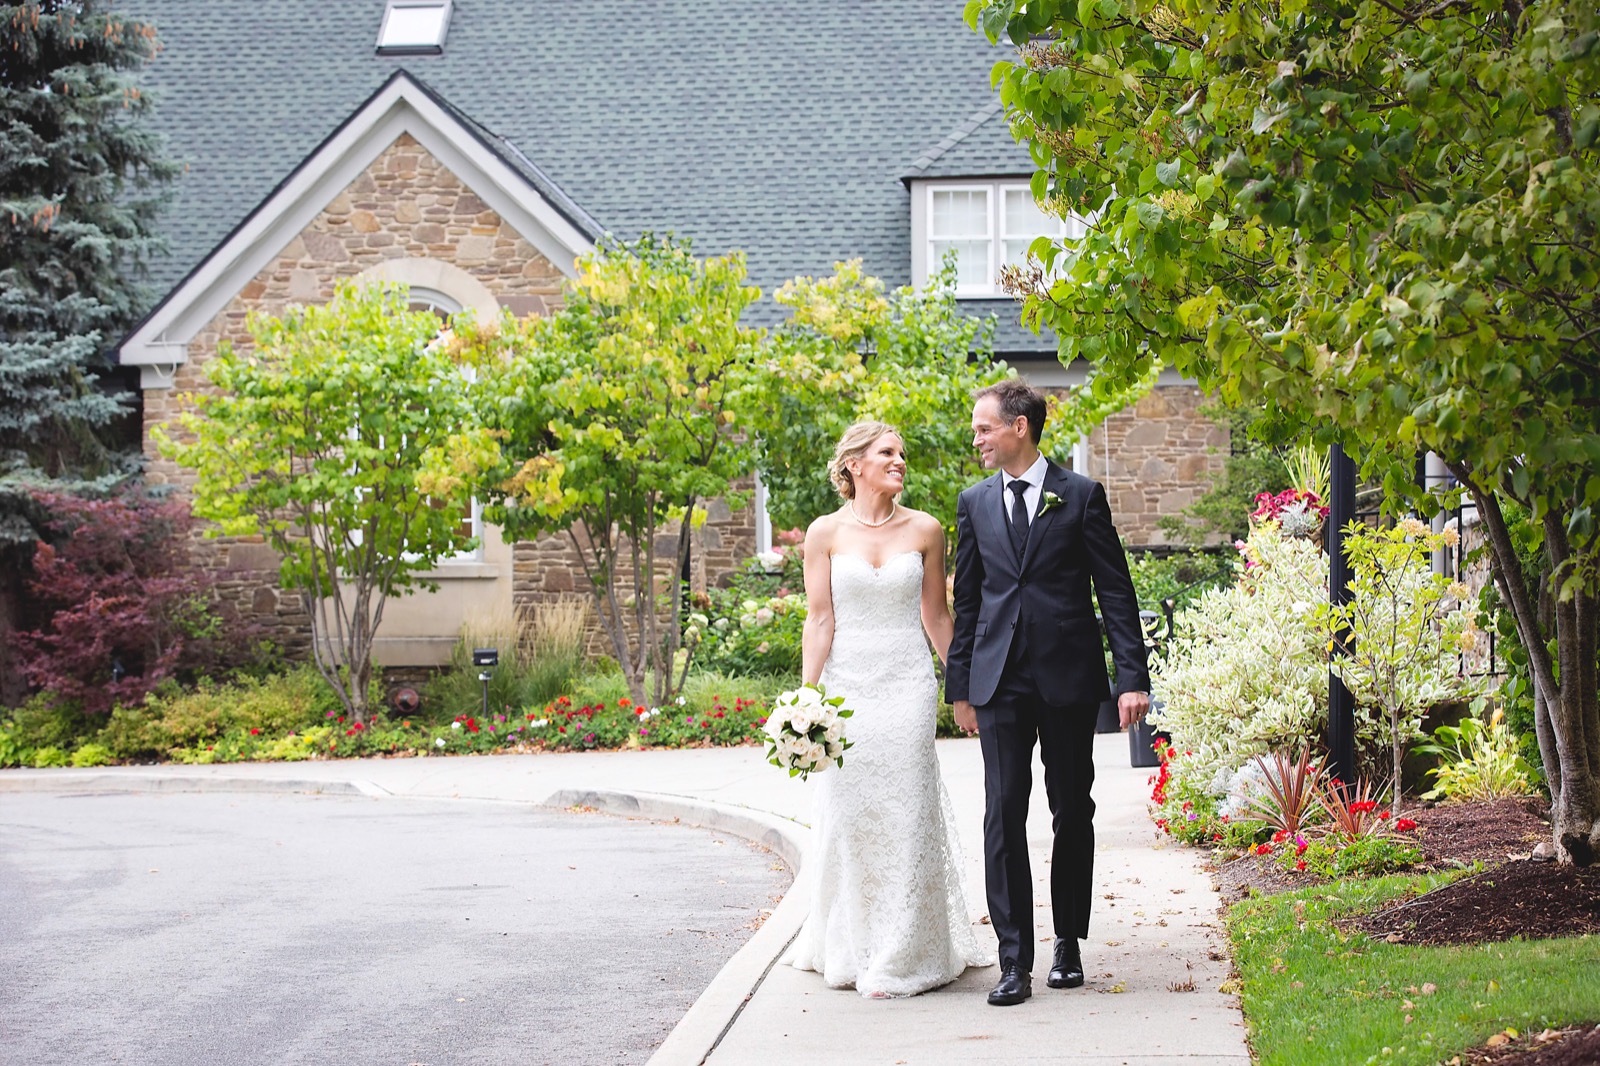 Wedding photography Mississauga: The best locations